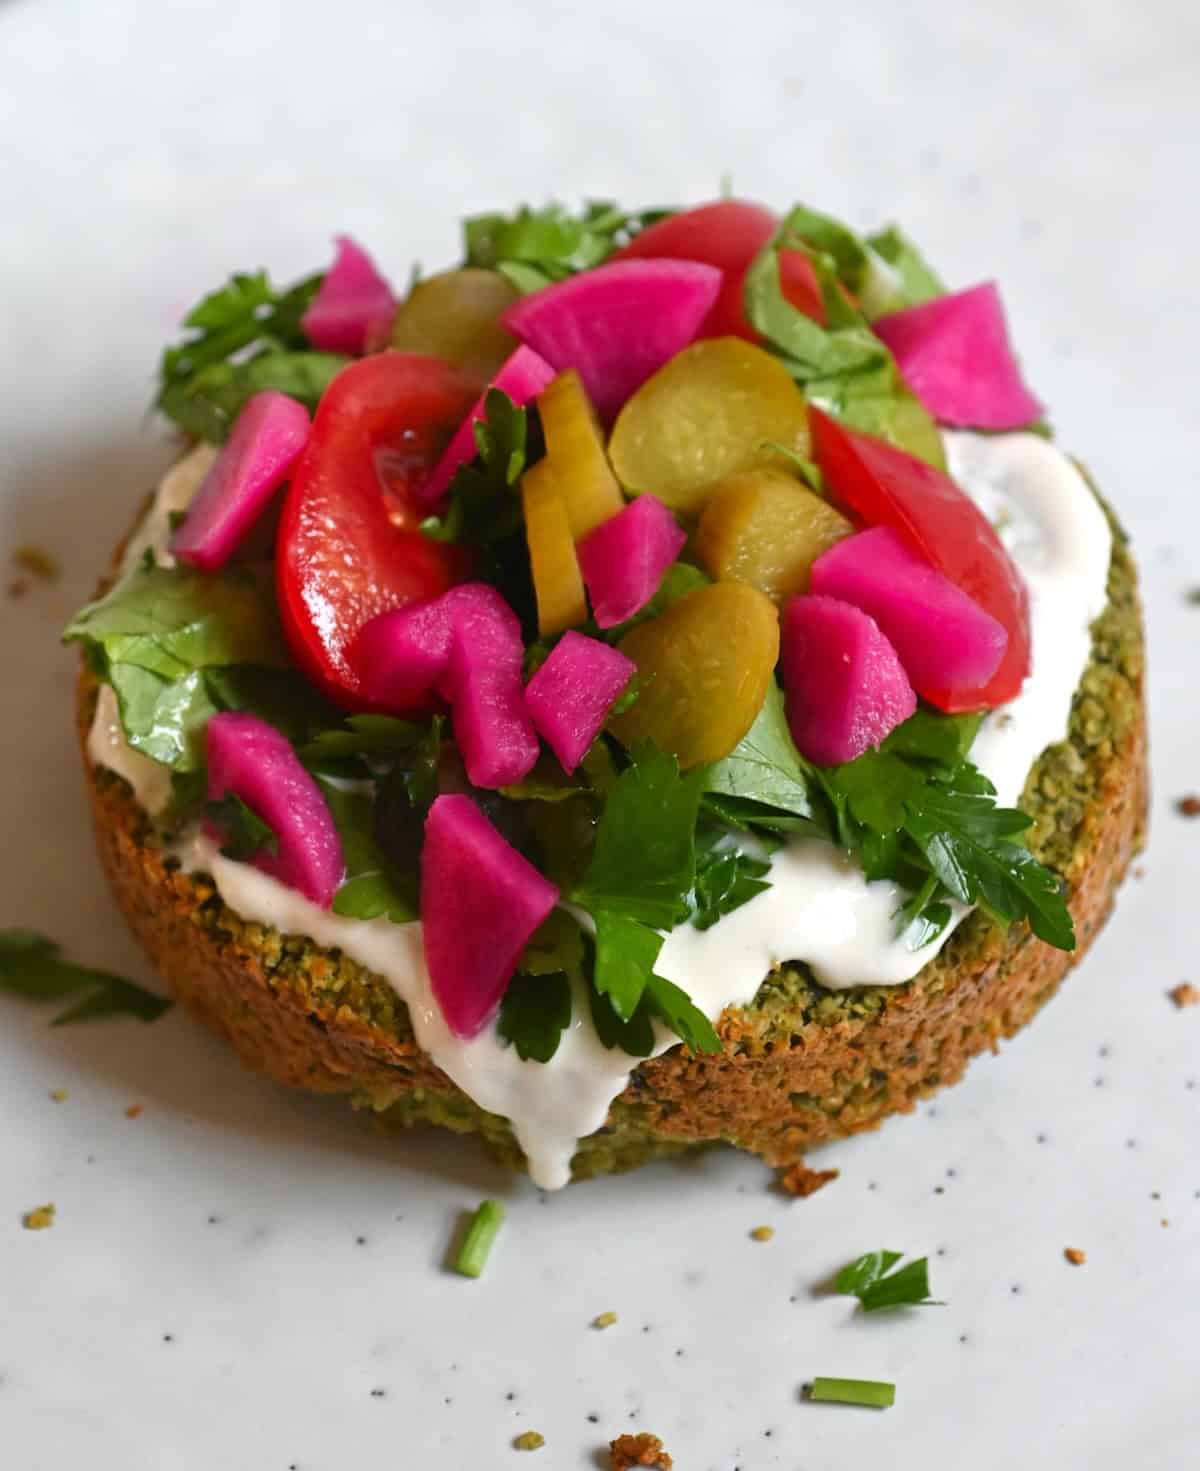 falafel burger patty topped with veggies and pickles